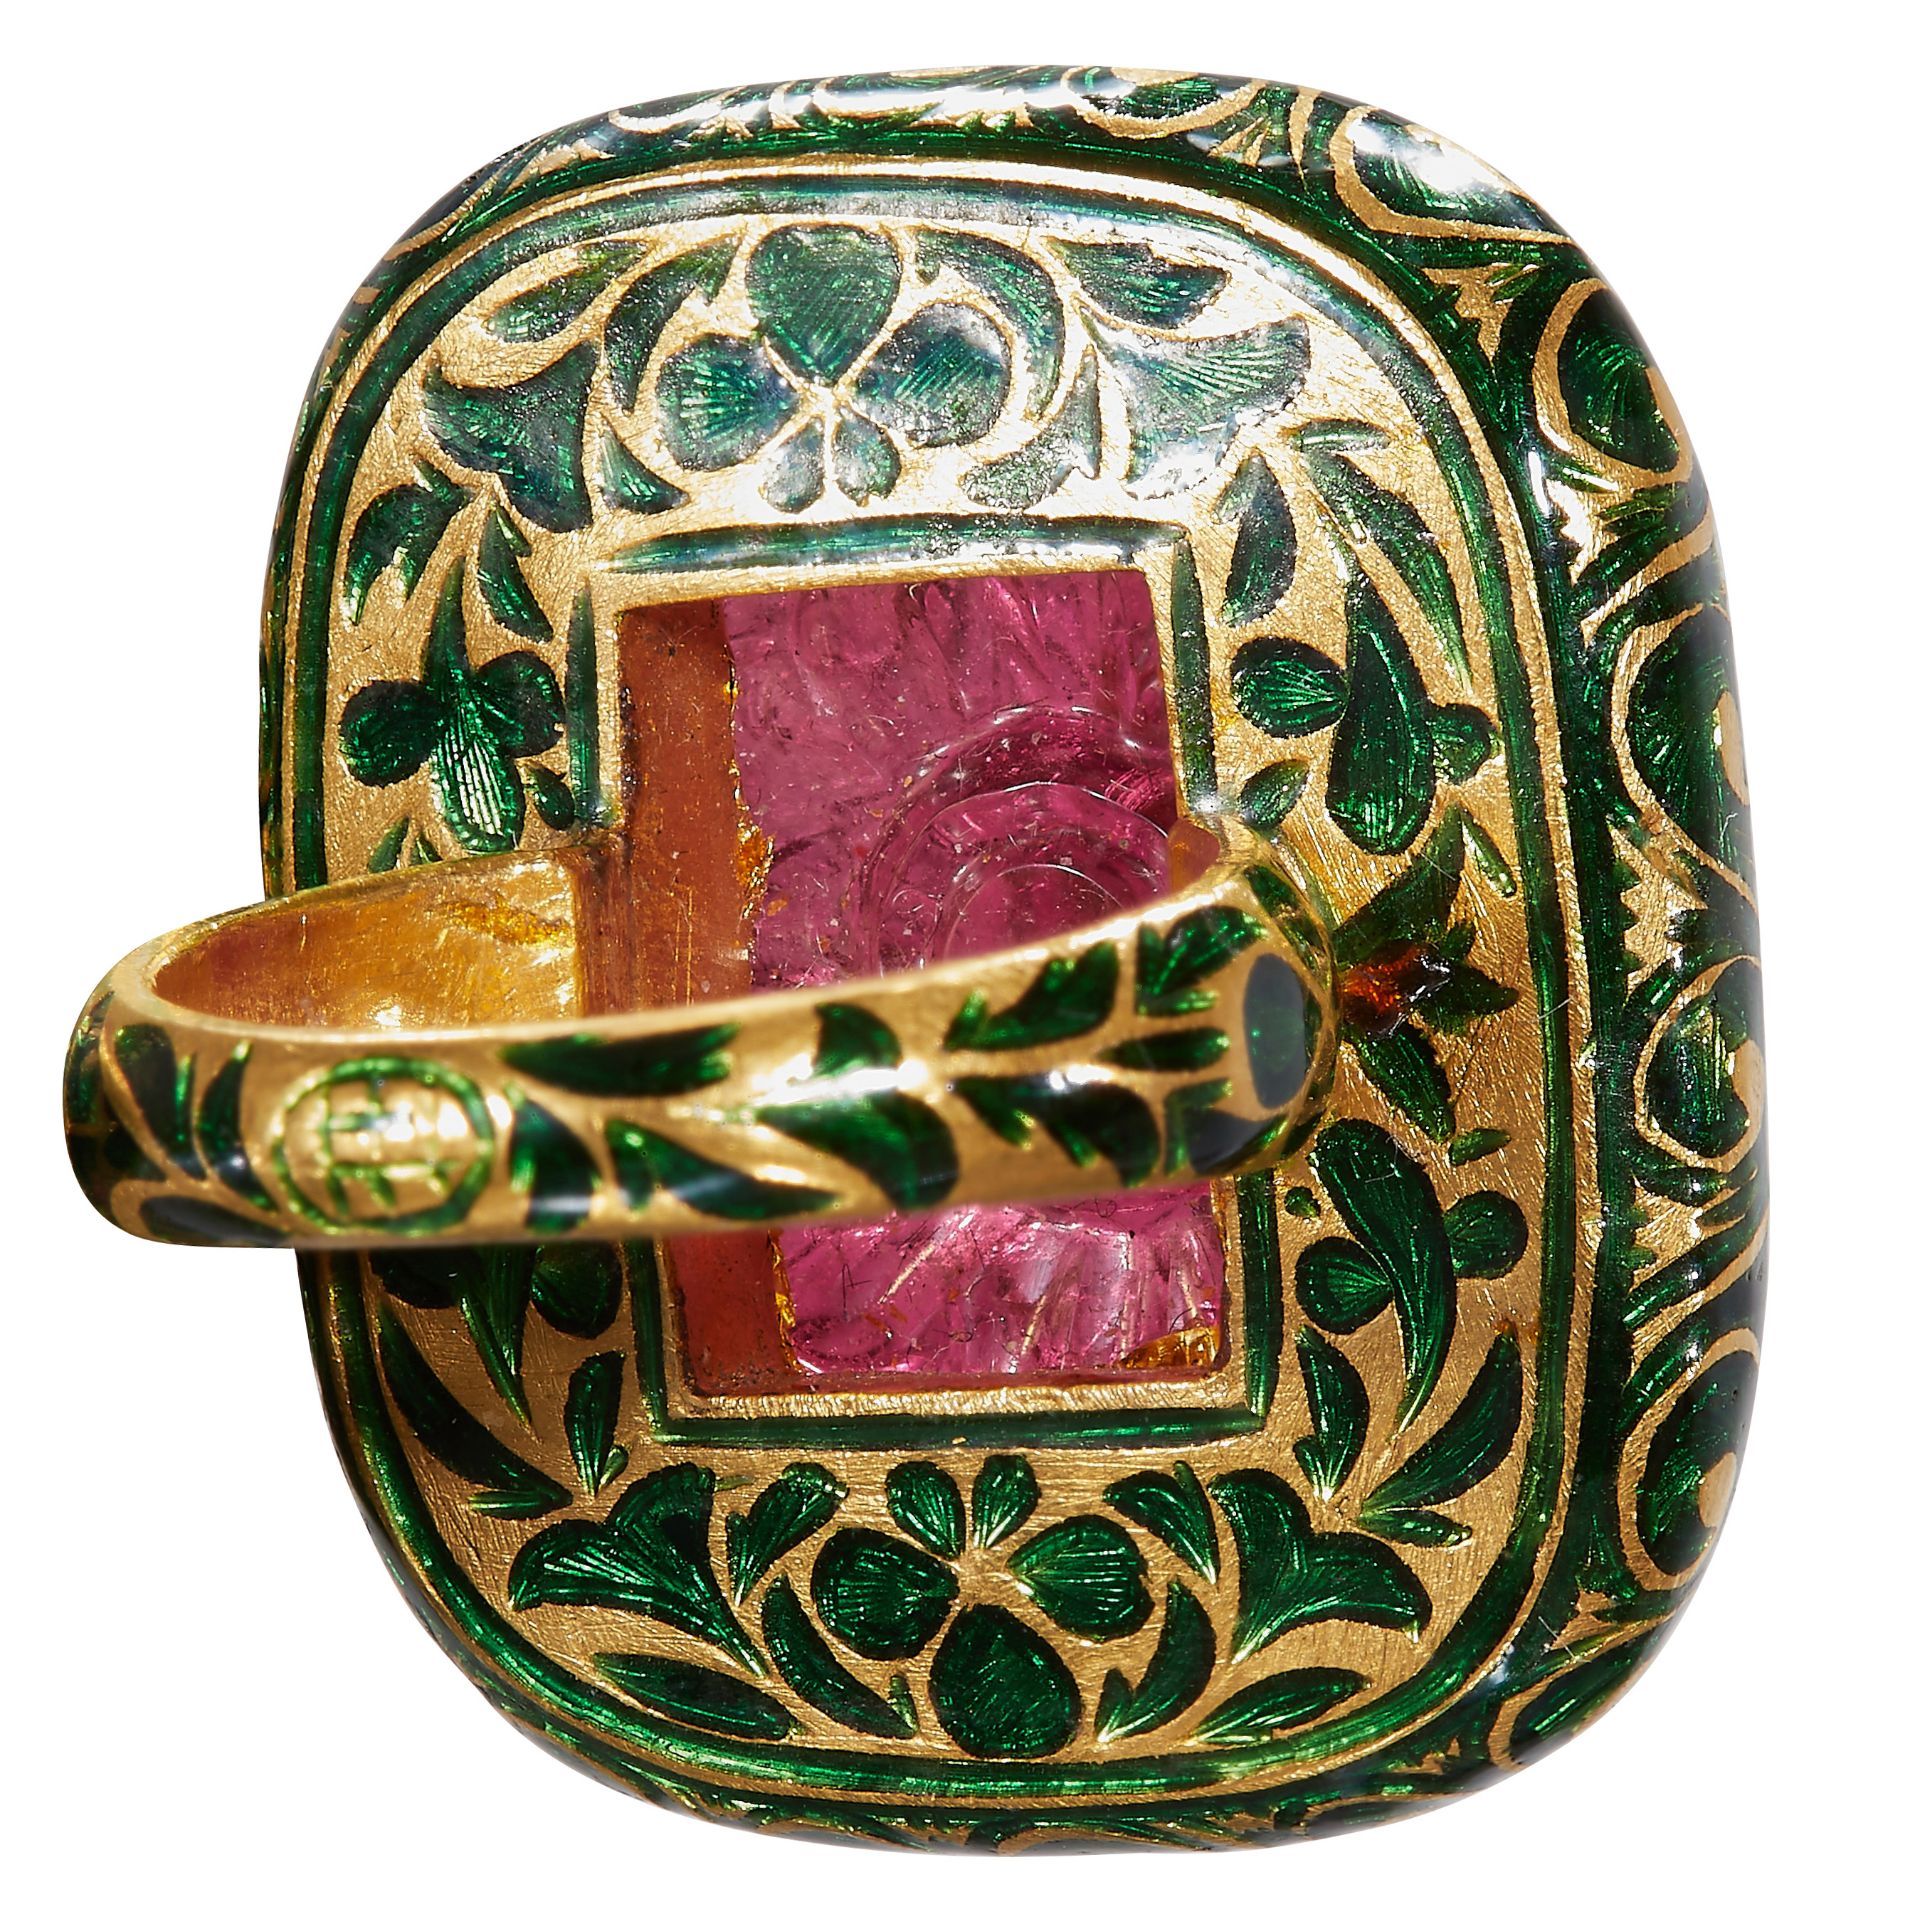 IMPRESSIVE HEAVY CARVED RUBLITE TOURMALINE AND ENAMEL GOLD RING - Image 2 of 2